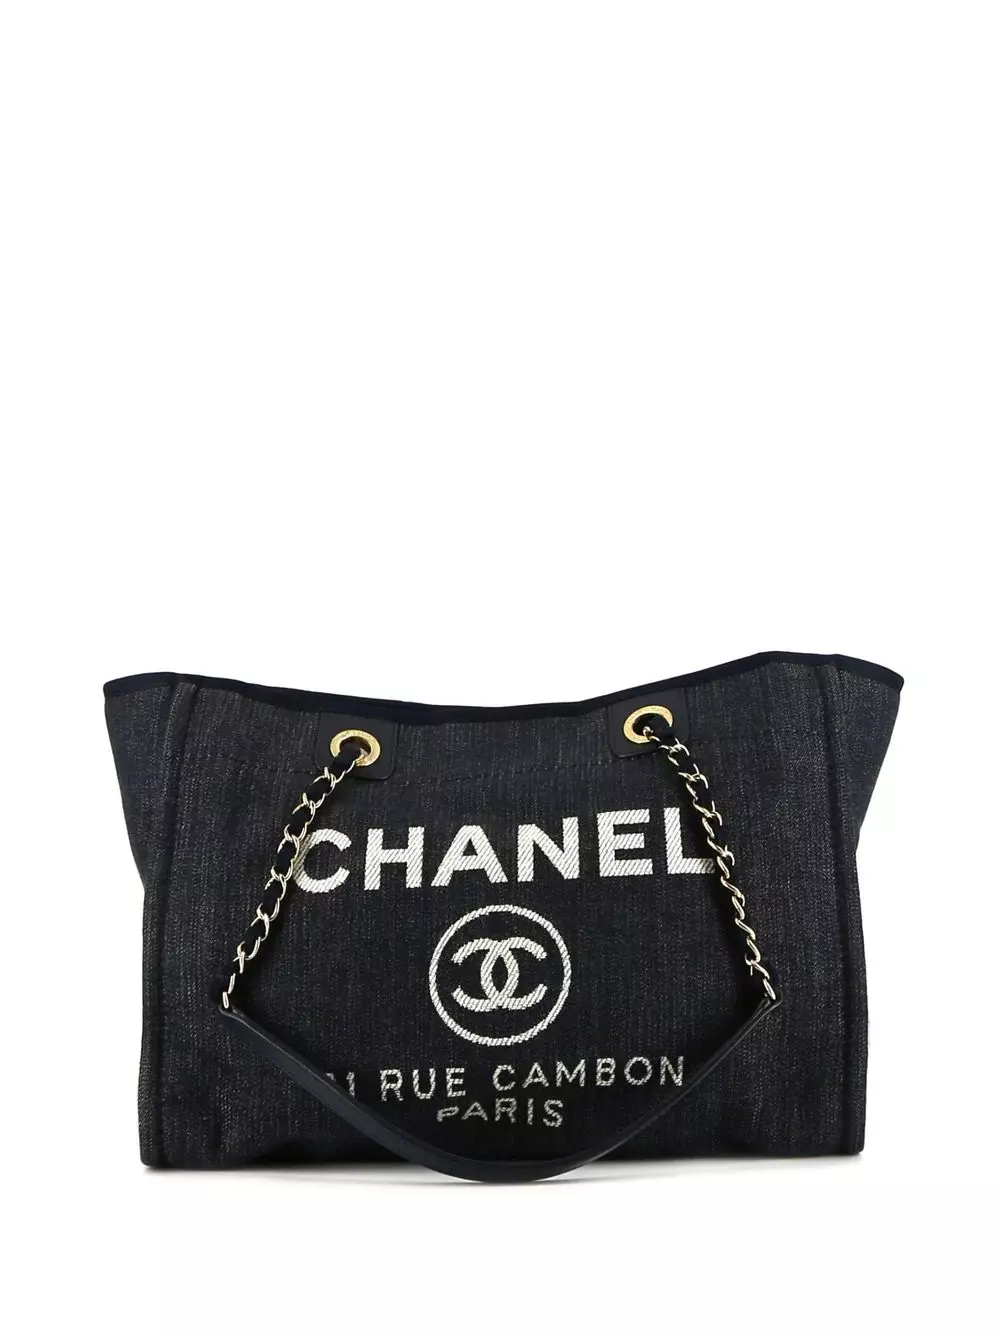 Chanel CHANEL Pre-Owned 2013 Deauville Canvas Tote Bag - Farfetch